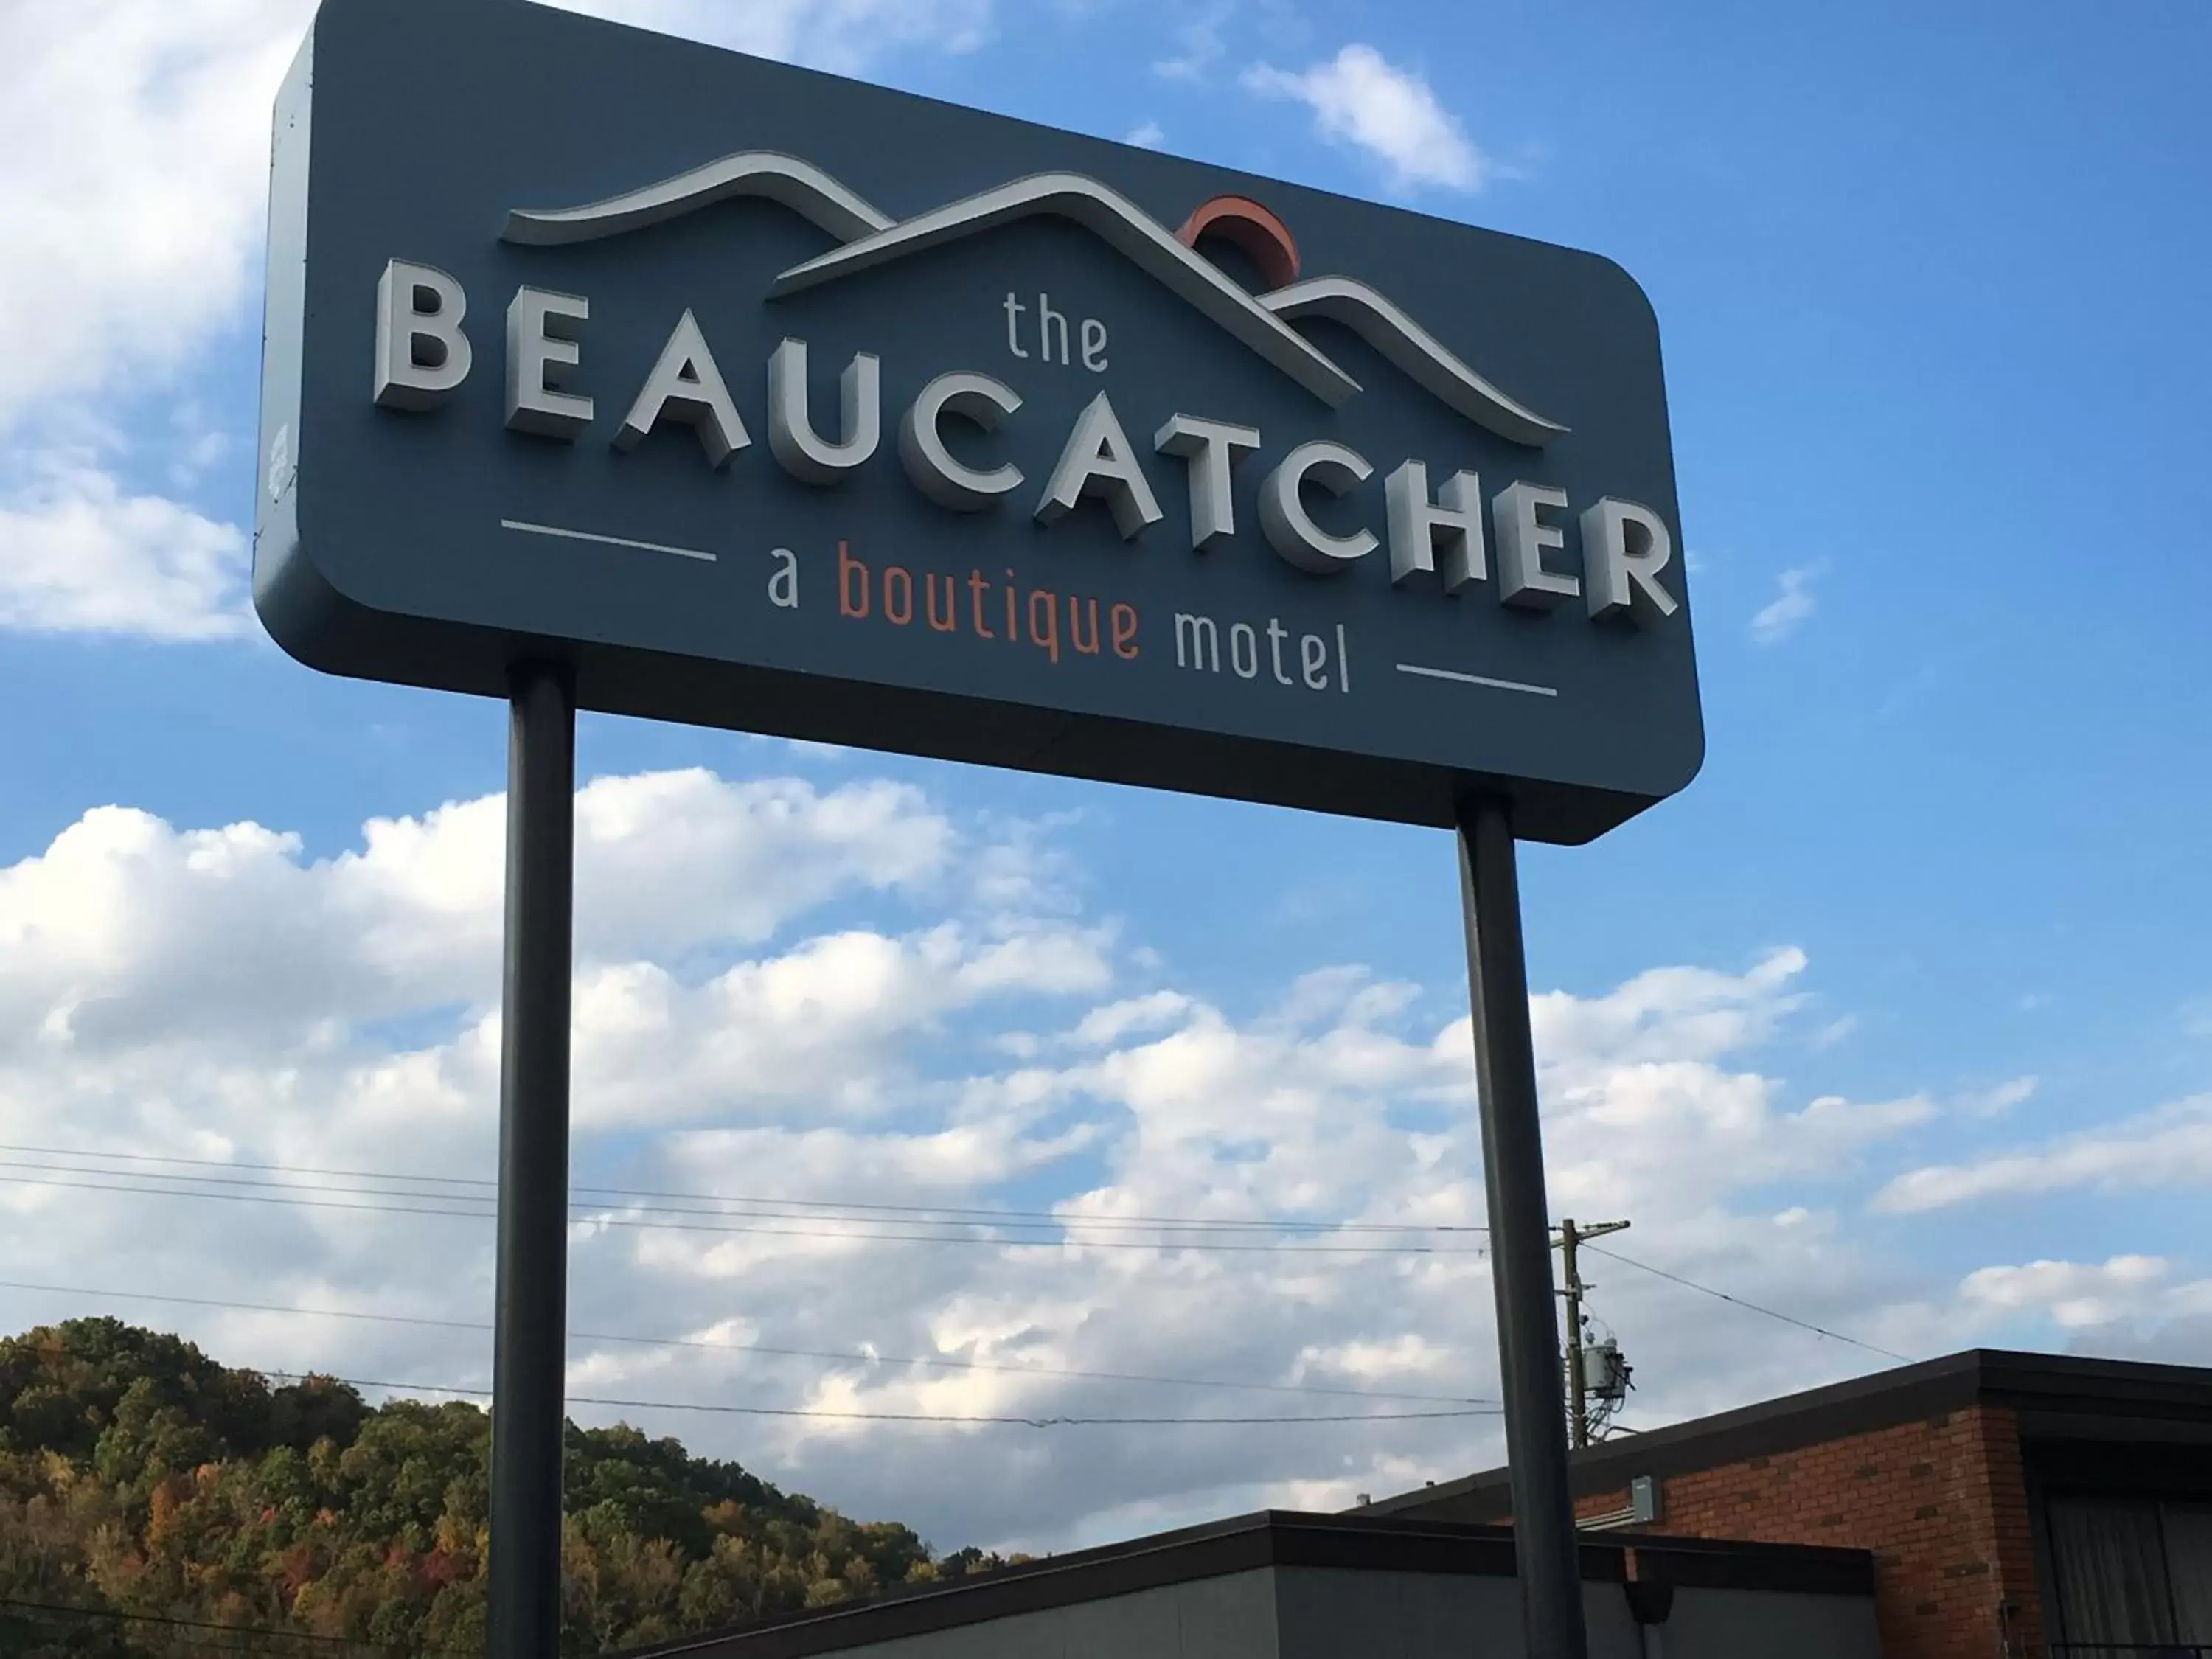 Property logo or sign in The Beaucatcher, a Boutique Motel